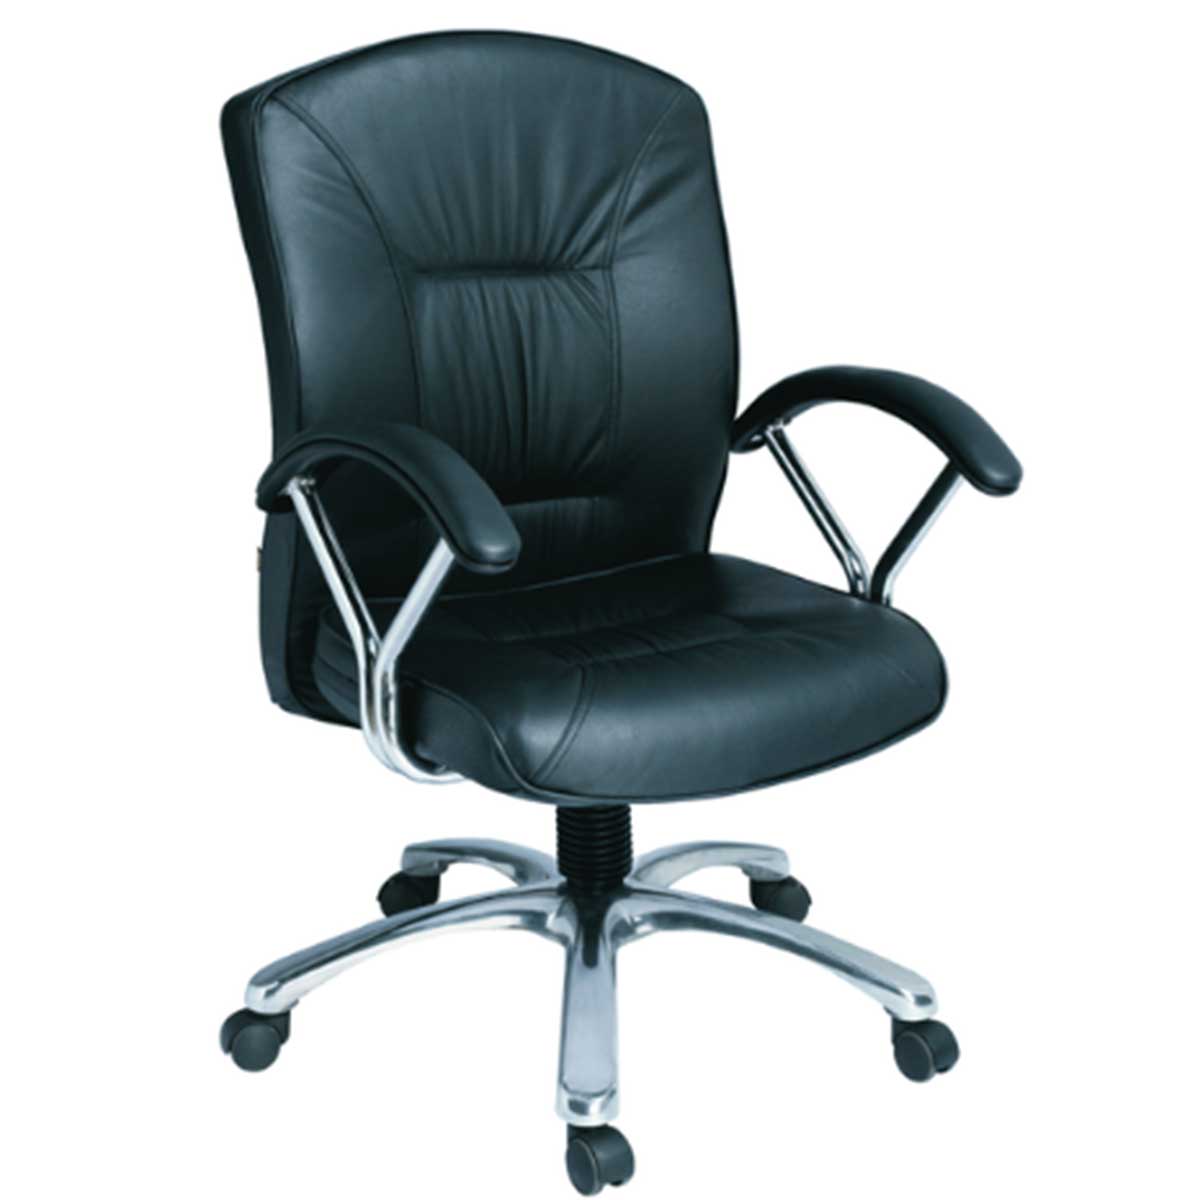 Godrej office chair Manufacturers, Suppliers in Noida Sector 78